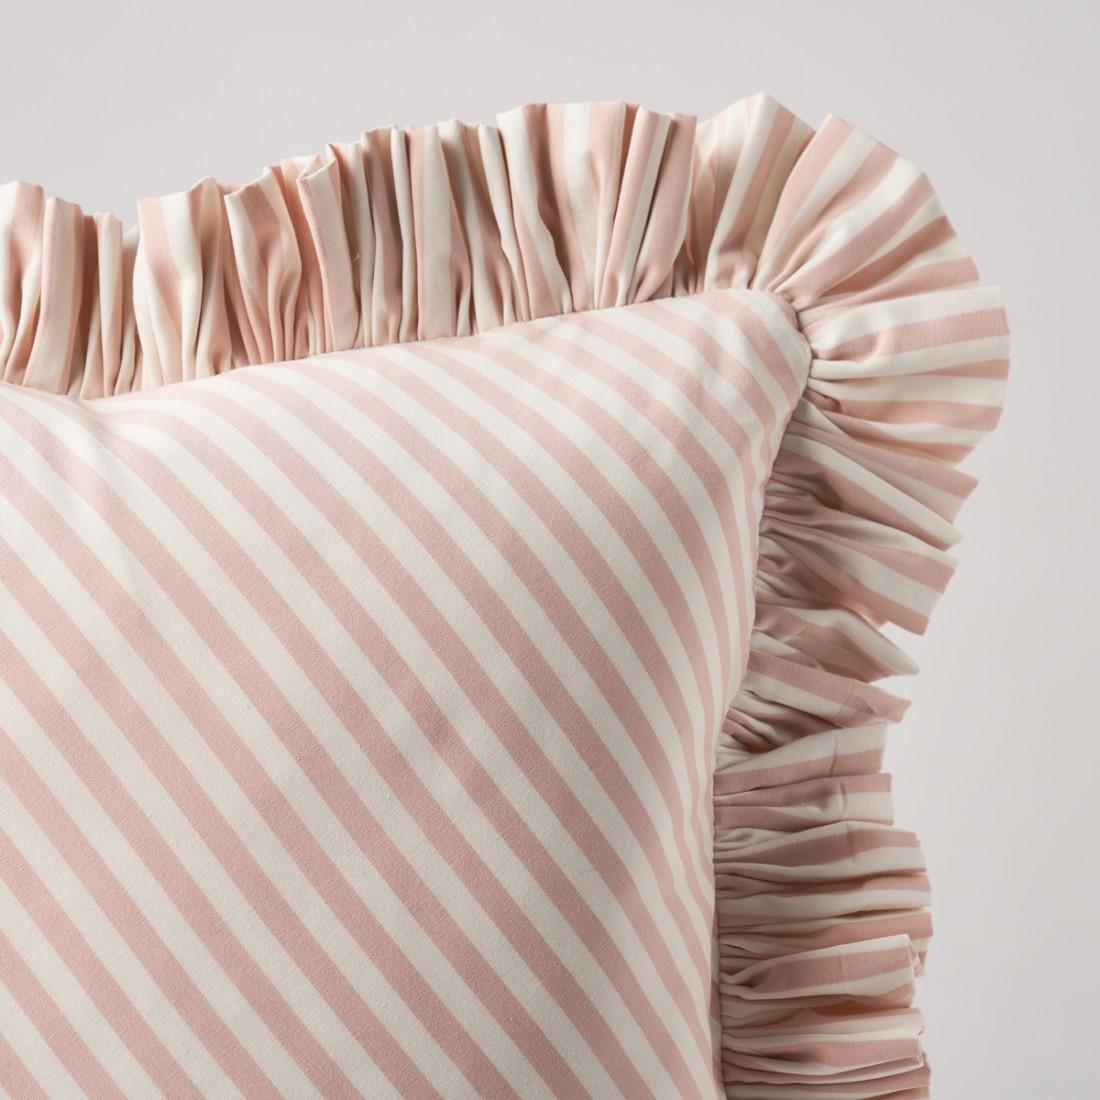 This pillow features Brigitte Stripe with a fringe finish. The perfect thin stripe, not too casual and not too dressy. Pillow includes a feather/down fill insert and hidden zipper closure.

*If out of stock, lead-time is 15-20 business days